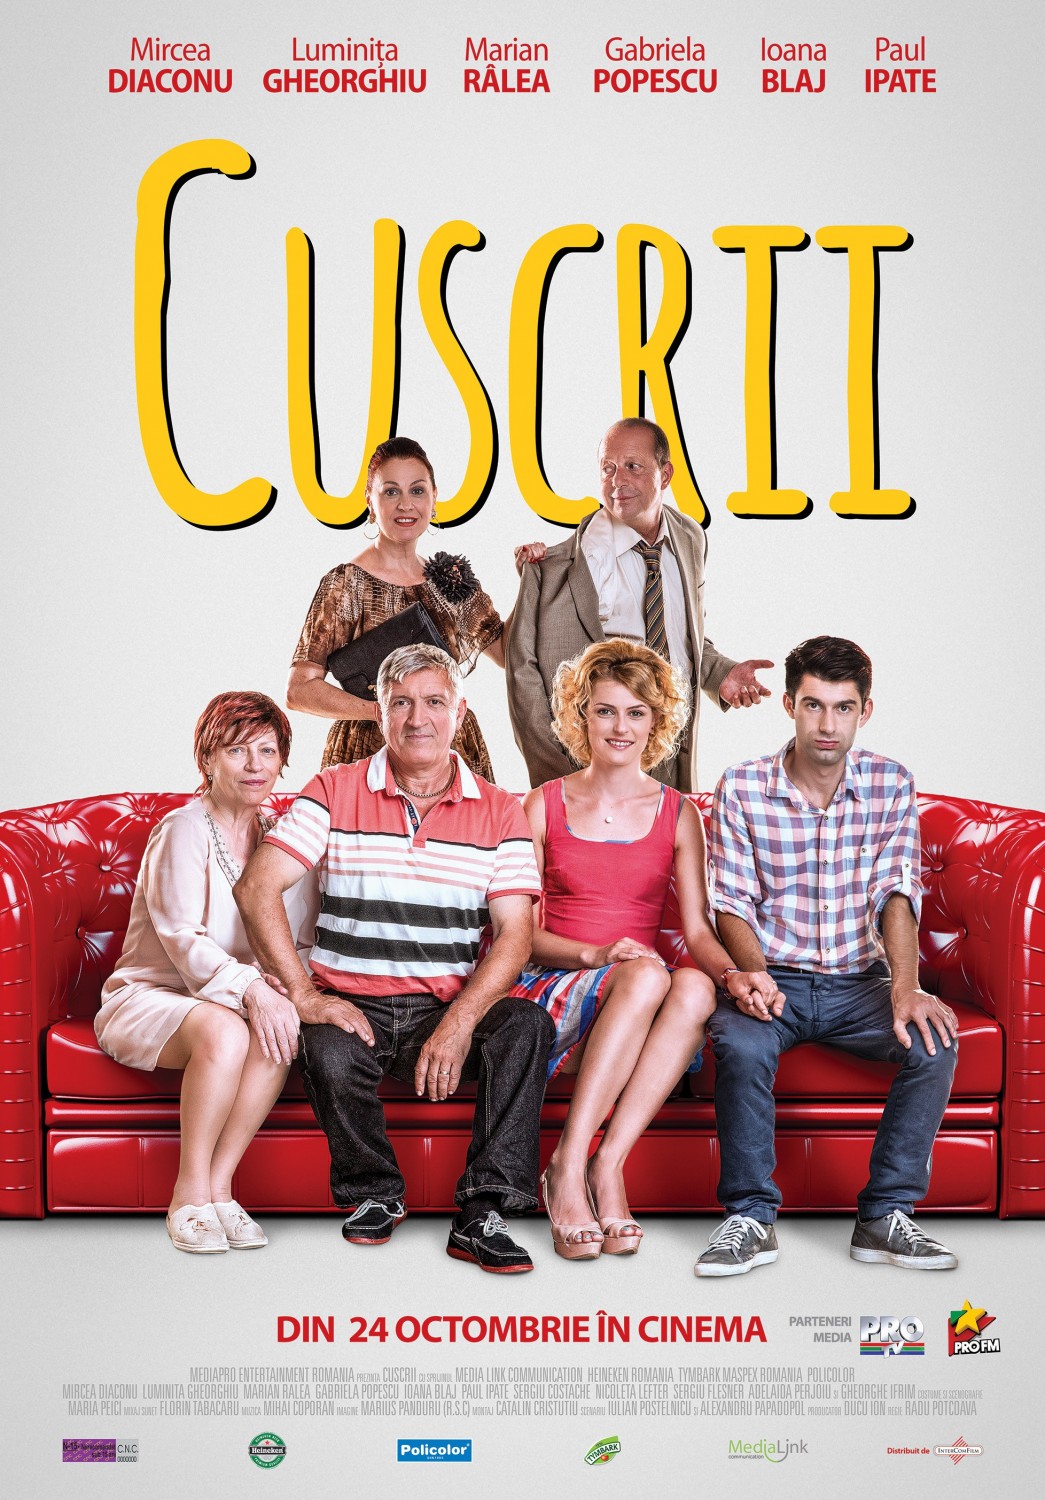 Extra Large Movie Poster Image for Cuscrii 